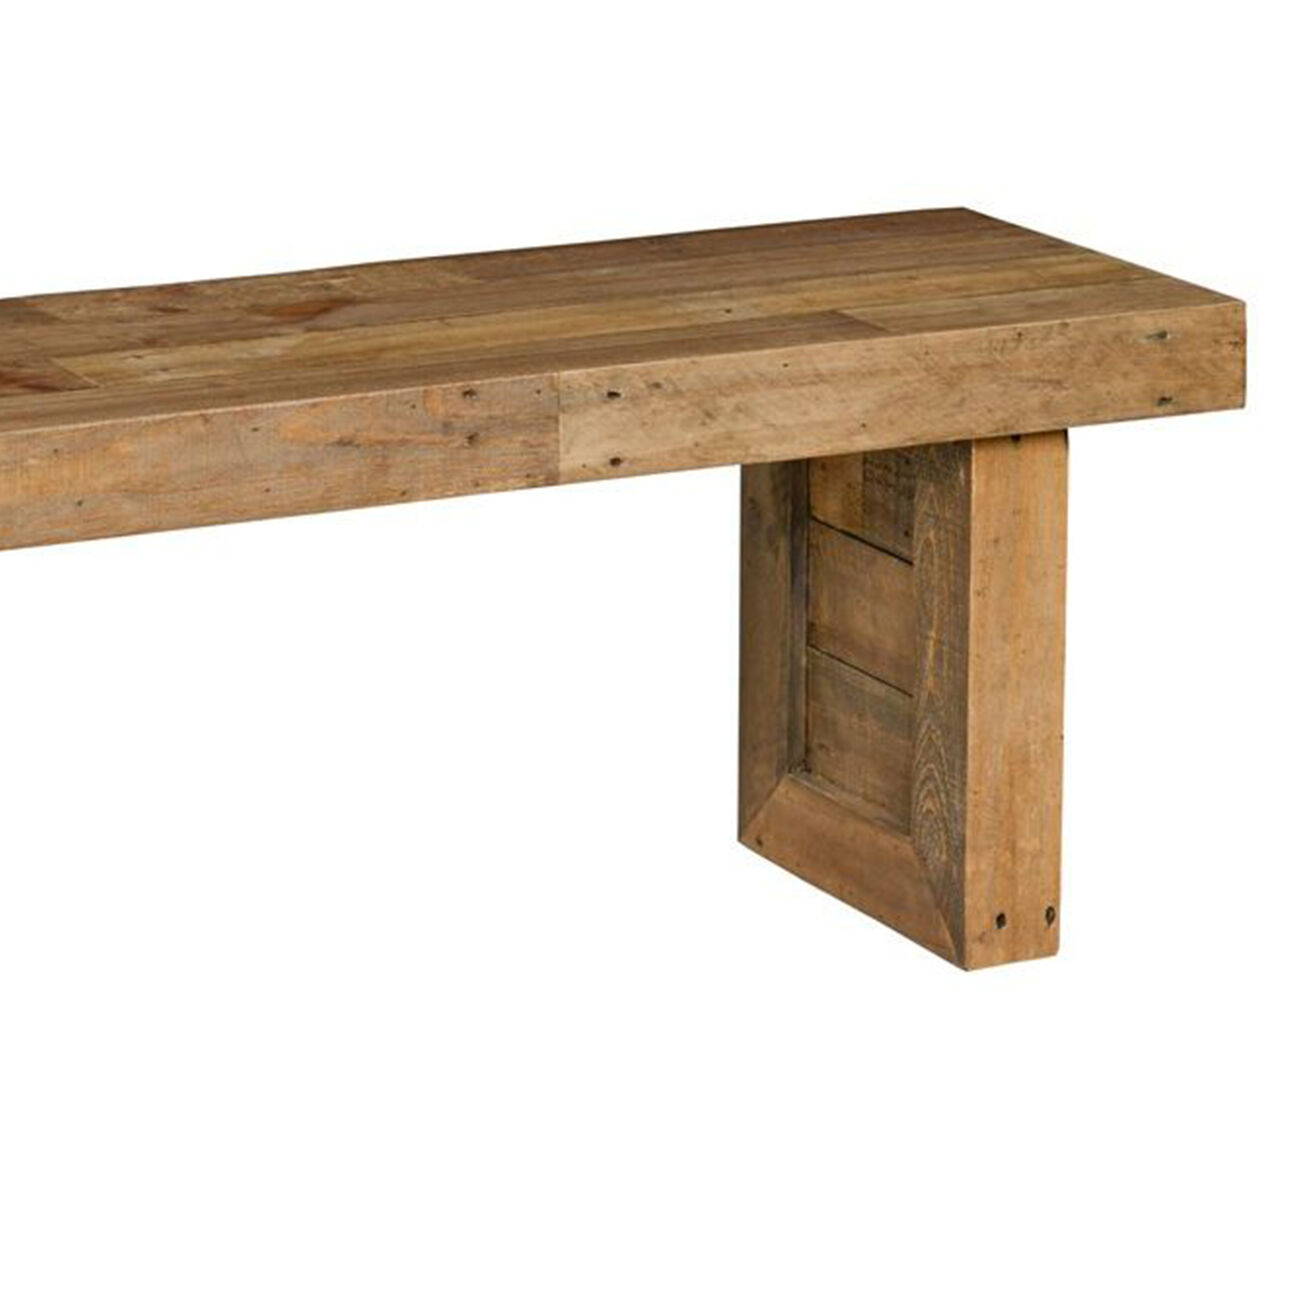 Rectangular Reclaimed Wood Frame Bench with Sled Base, Brown